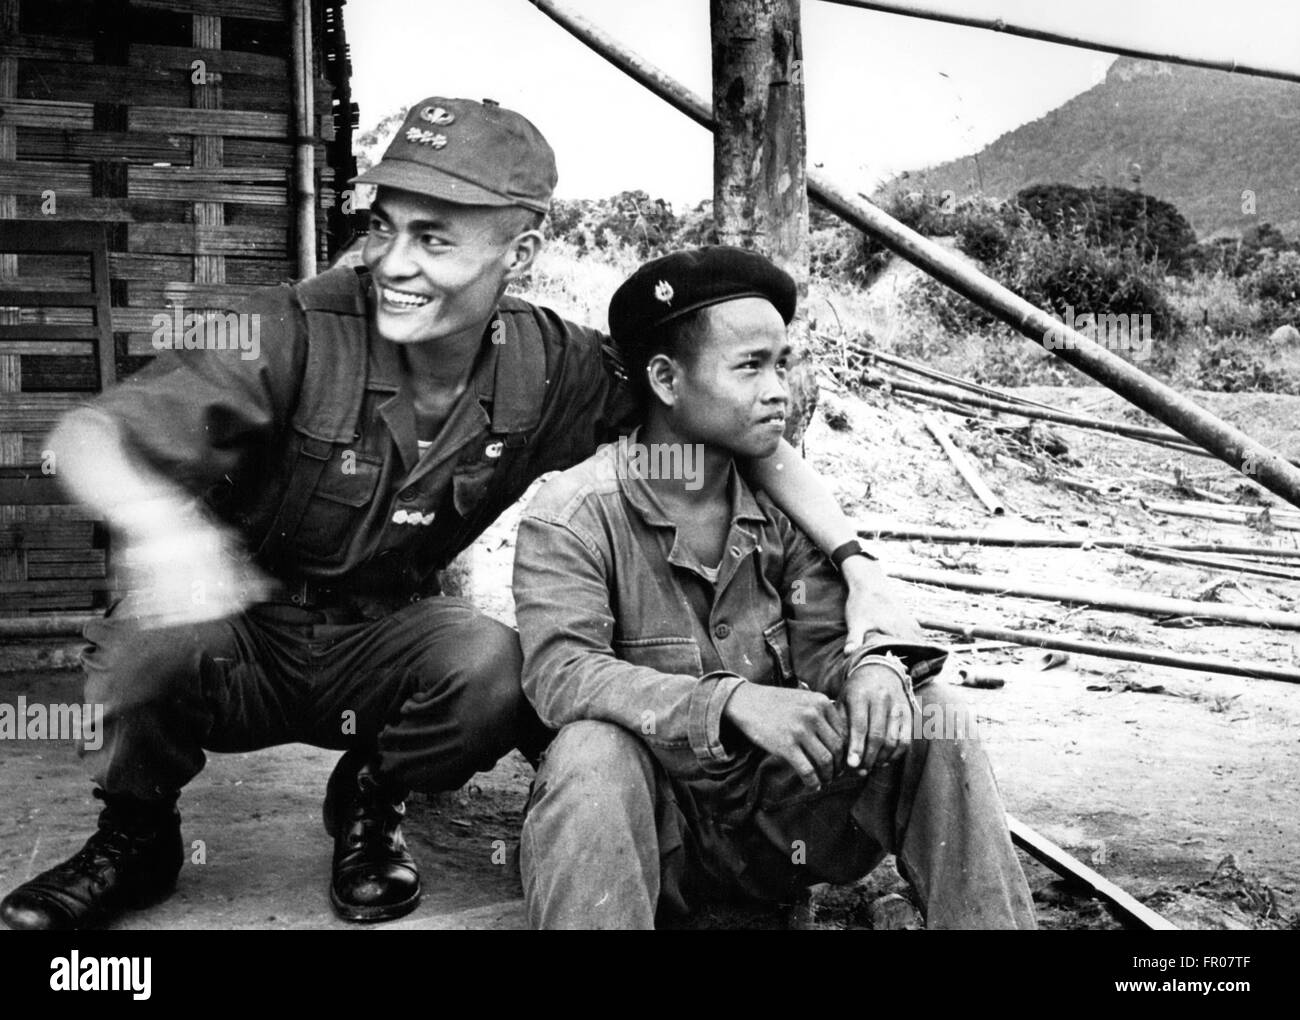 1962 - Laos. Speculation persists in Saigon that South Vietnamese government troops will form an alliance wit right-wing Lao troops and across the mountainous jungles in Laos. These photo show a South Vietnamese captain (in dark fatigues and baseball-like cap) and South Vietnamese civic action girls with Lao troops (in maroon berets) © Keystone Pictures USA/ZUMAPRESS.com/Alamy Live News Stock Photo